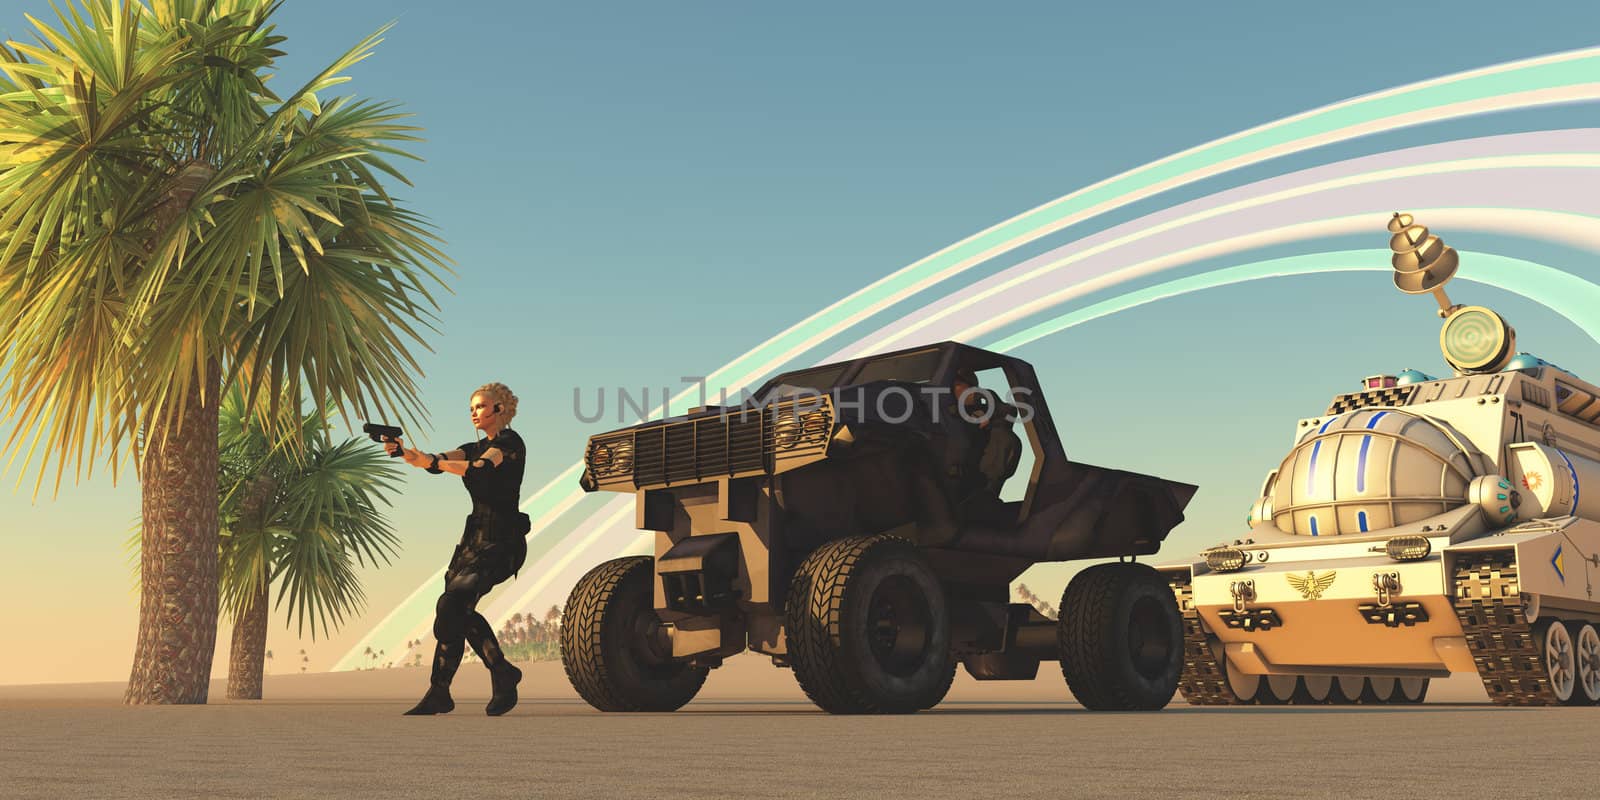 A female soldier draws her gun at an alien presence on a distant planet with rings orbiting in the sky.